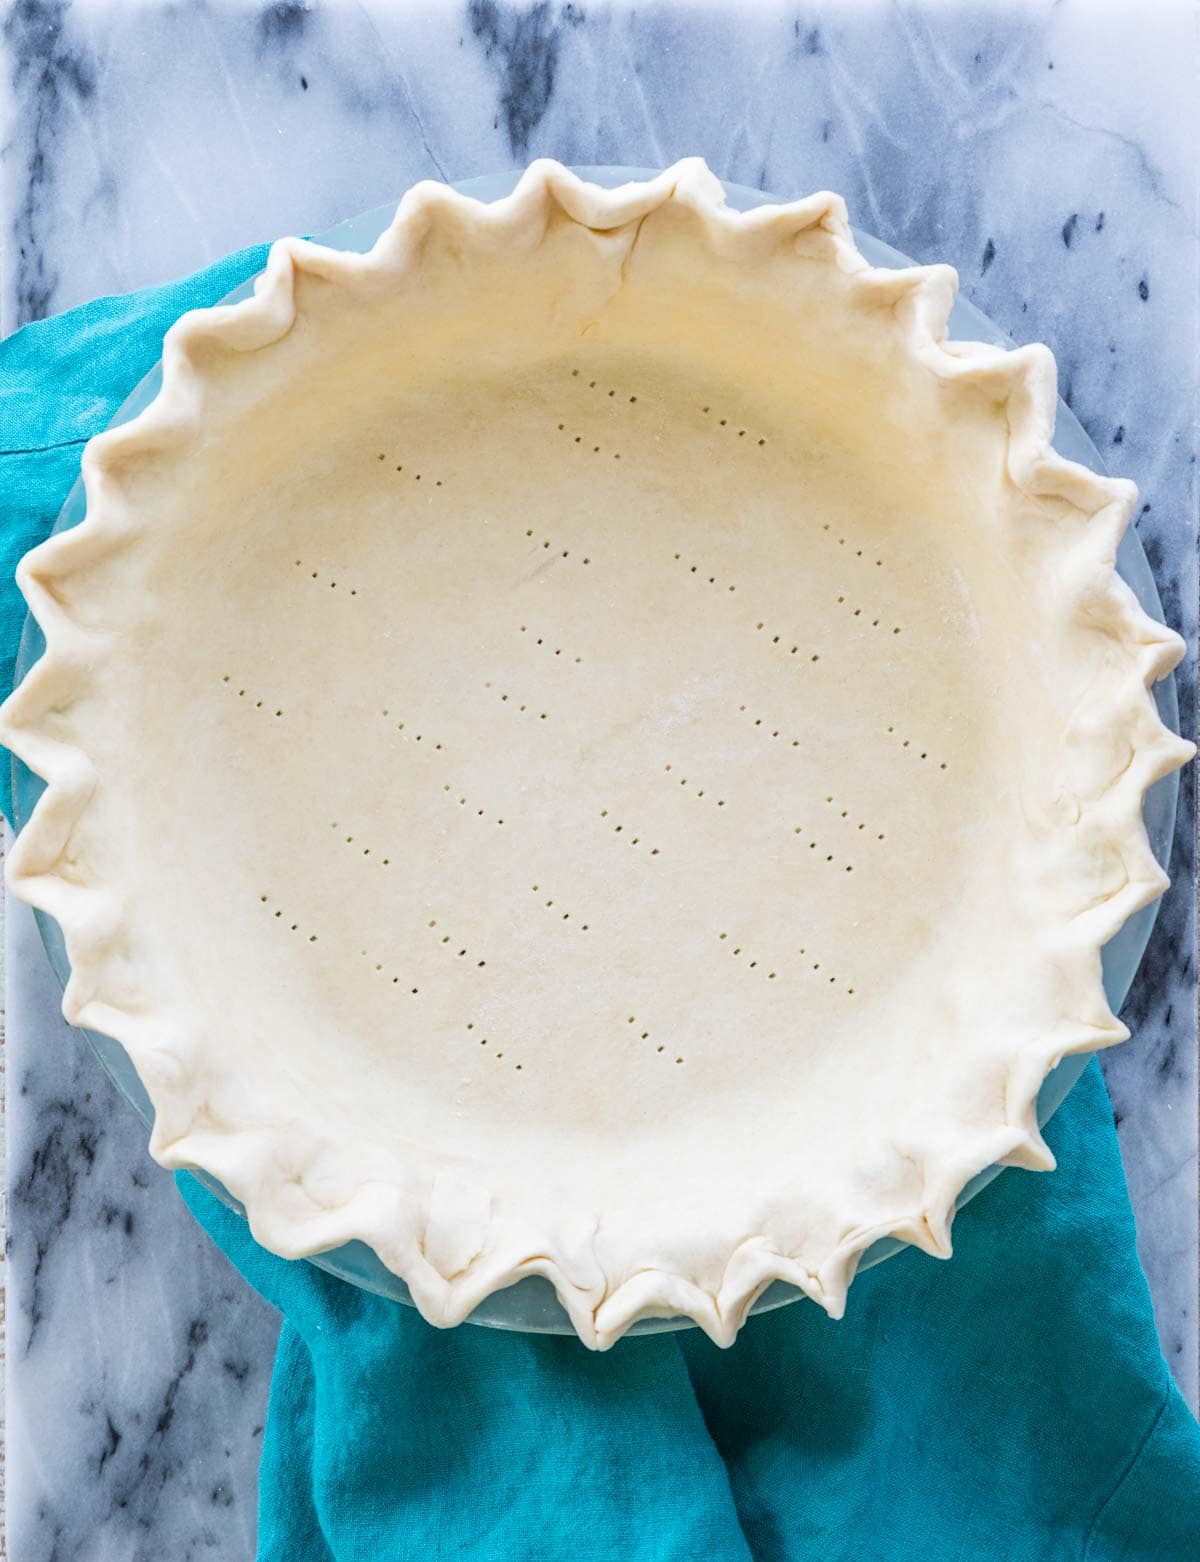 unbaked pie crust that's been docked before blind baking